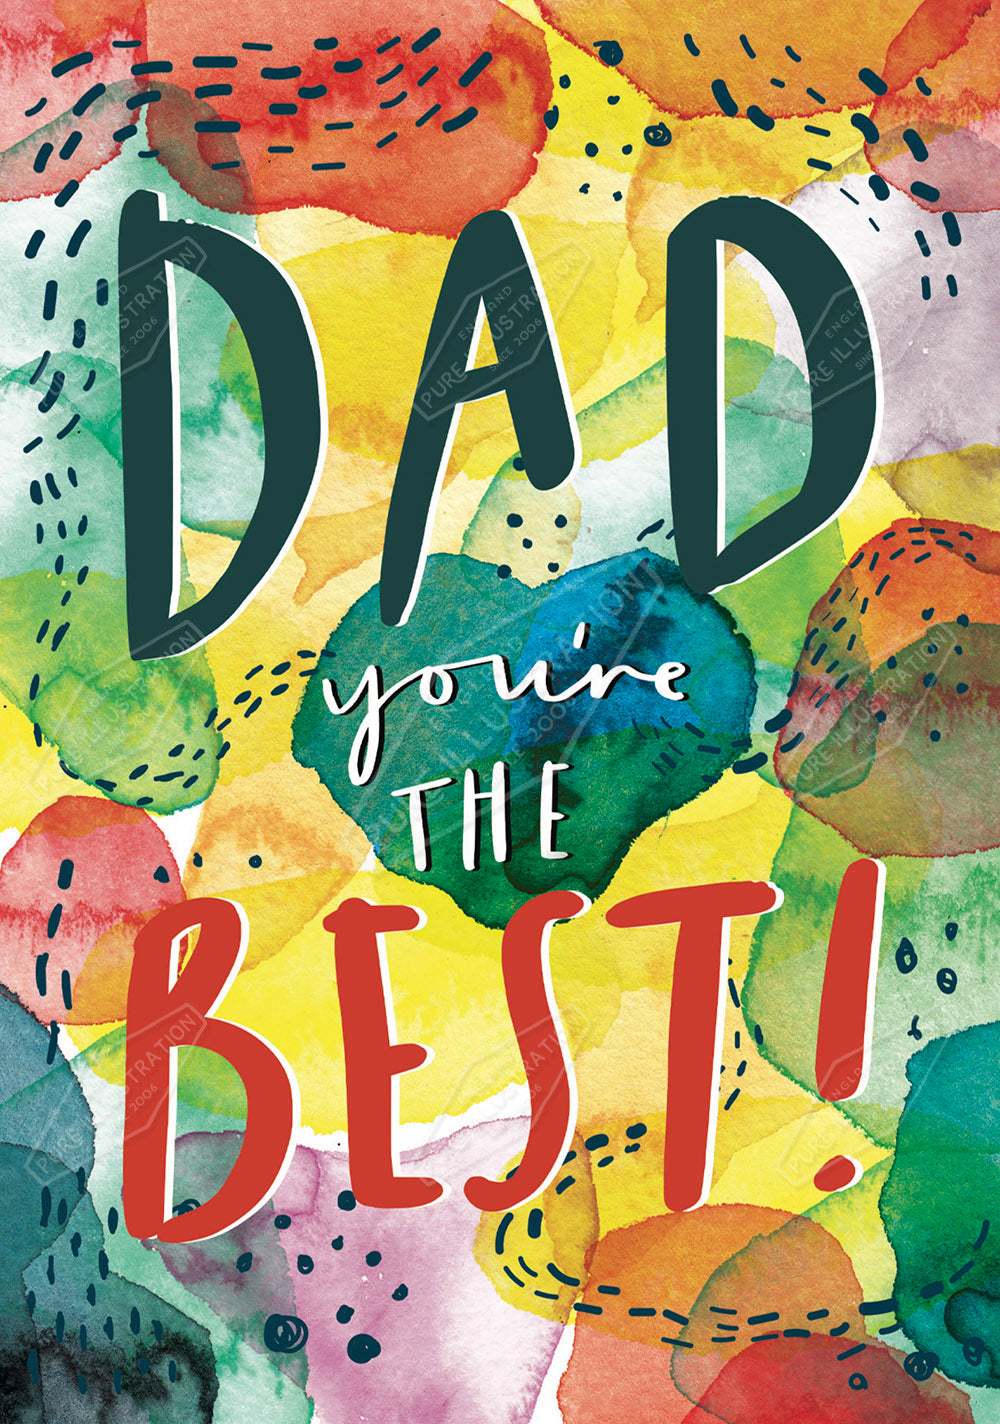 00034364EST- Emily Stalley is represented by Pure Art Licensing Agency - Father's Day Greeting Card Design